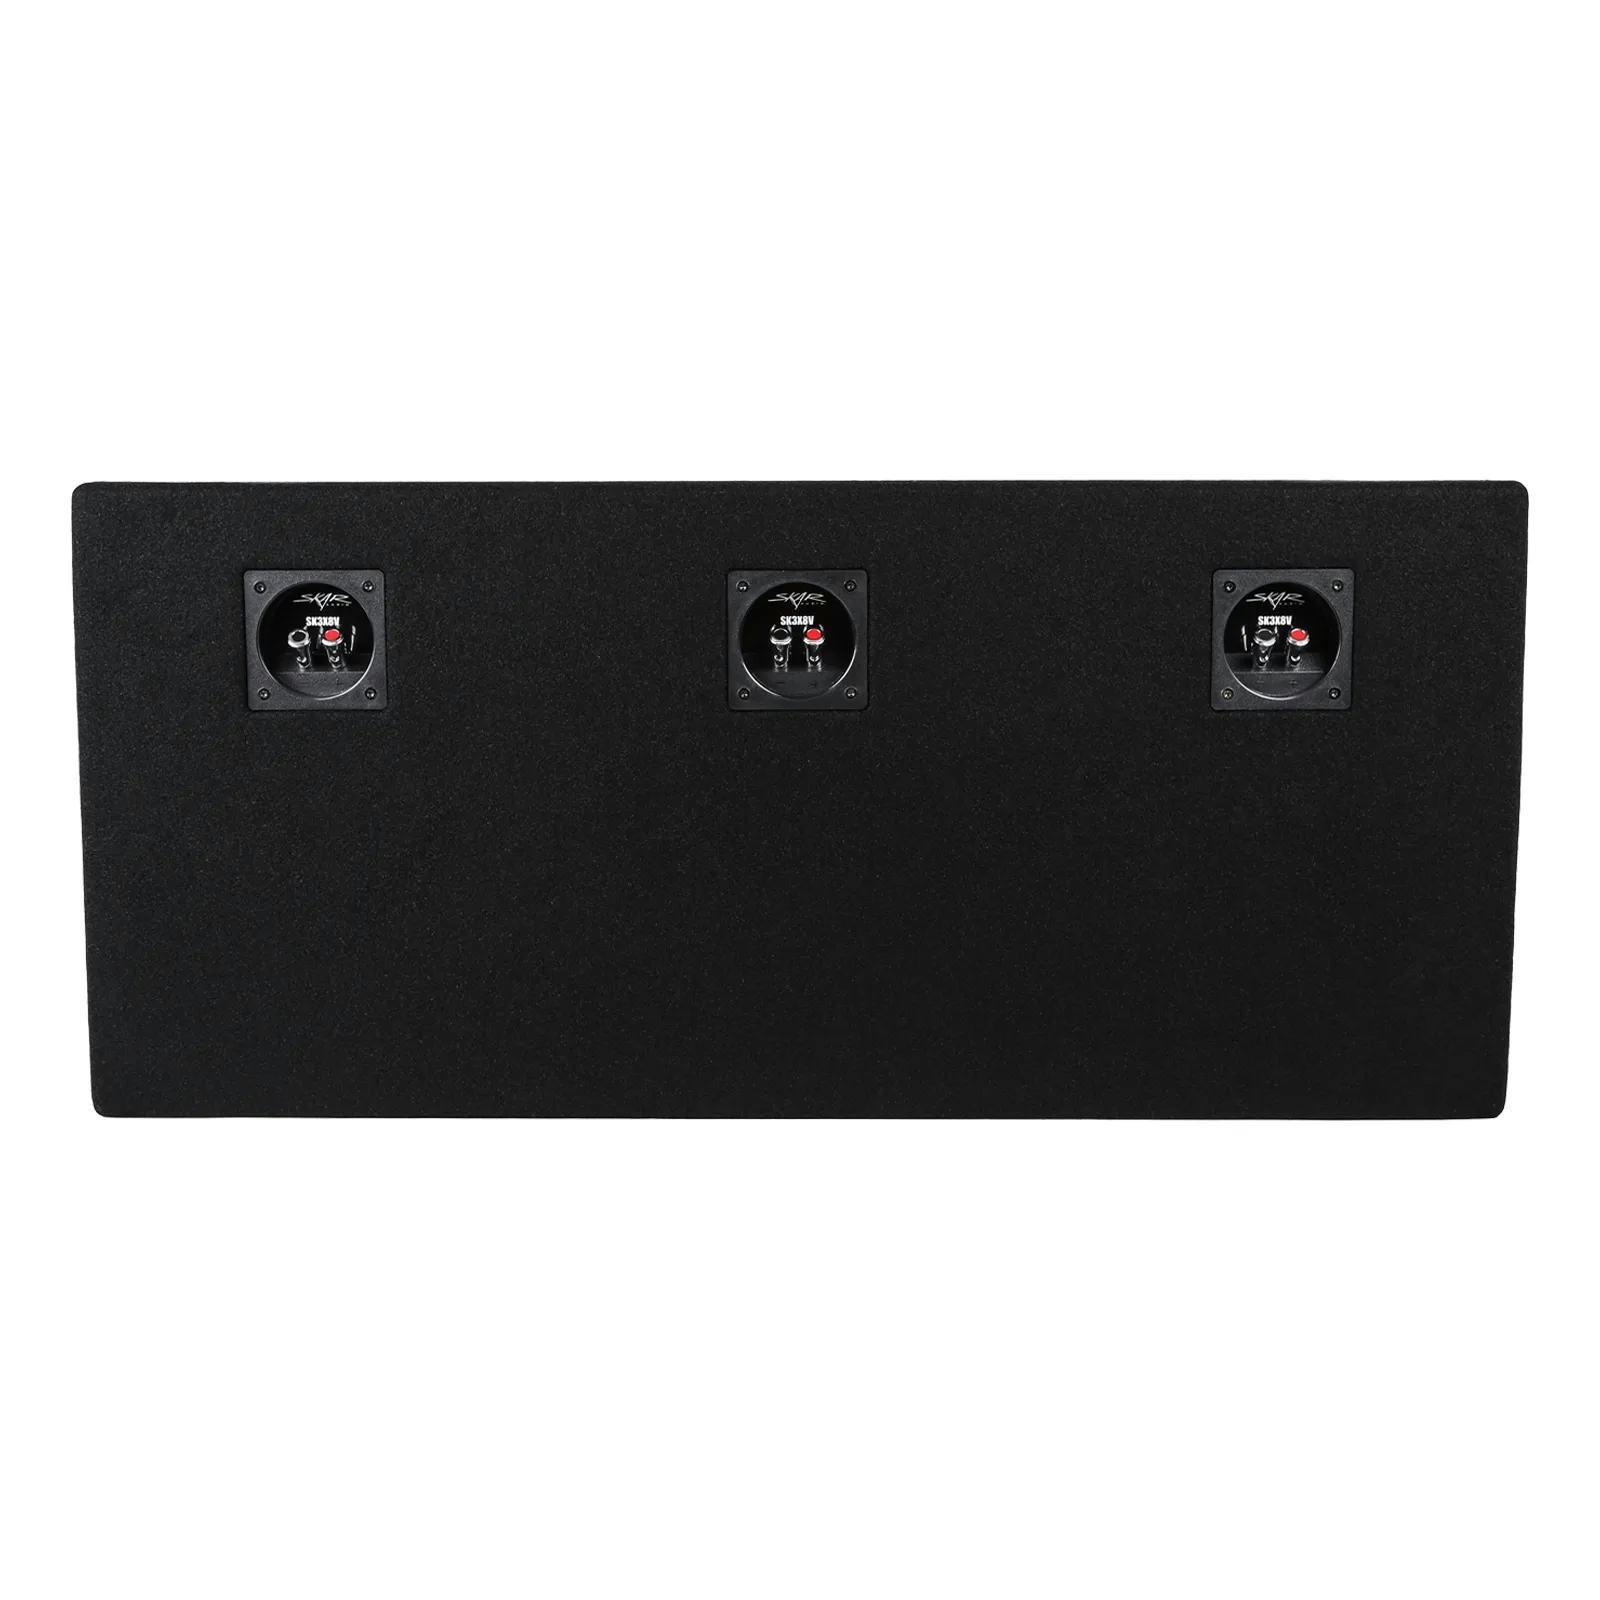 Triple 8" Ported Universal Fit Subwoofer Box #6